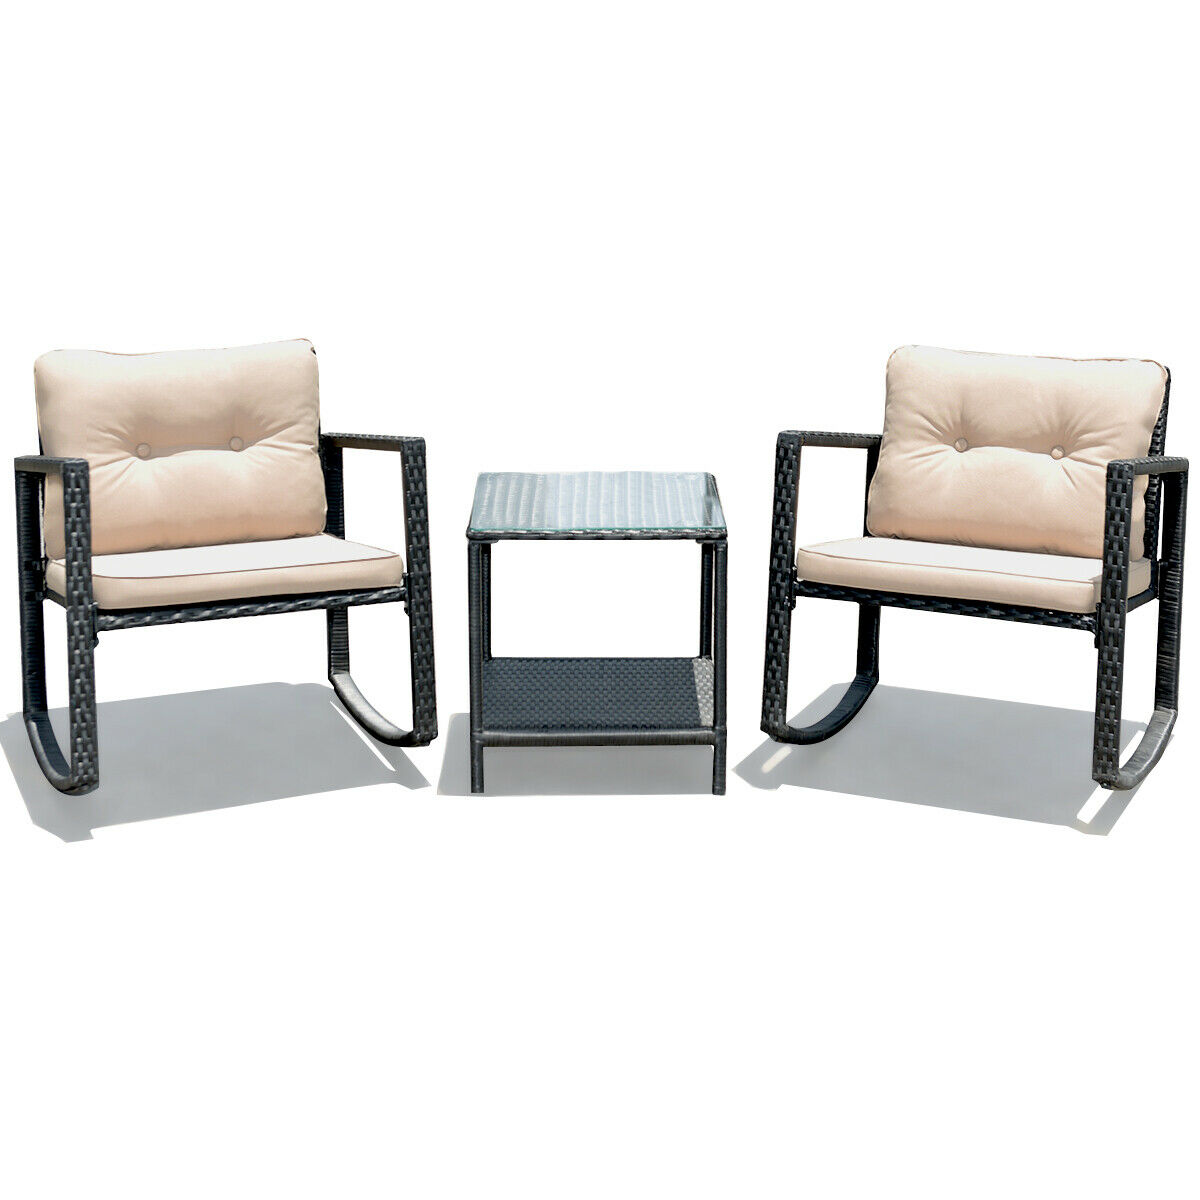 Gymax Set of 3 Rattan Rocking Chair Cushioned Sofa Unit Garden Patio Furniture - image 2 of 7